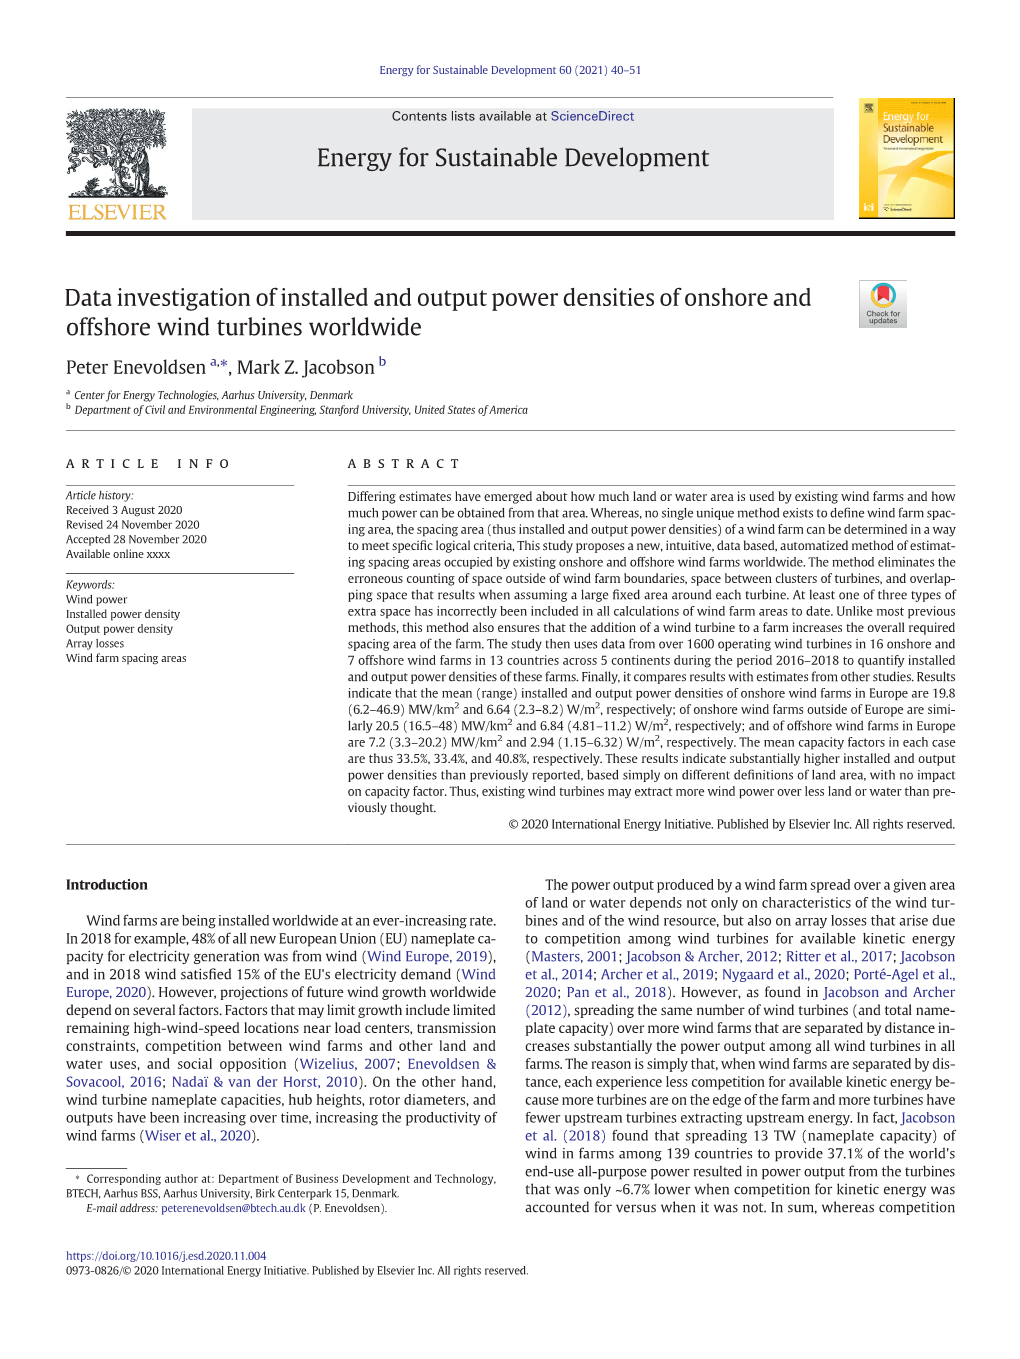 Installed and Output Power Densities of Onshore and Offshore Wind Turbines Worldwide